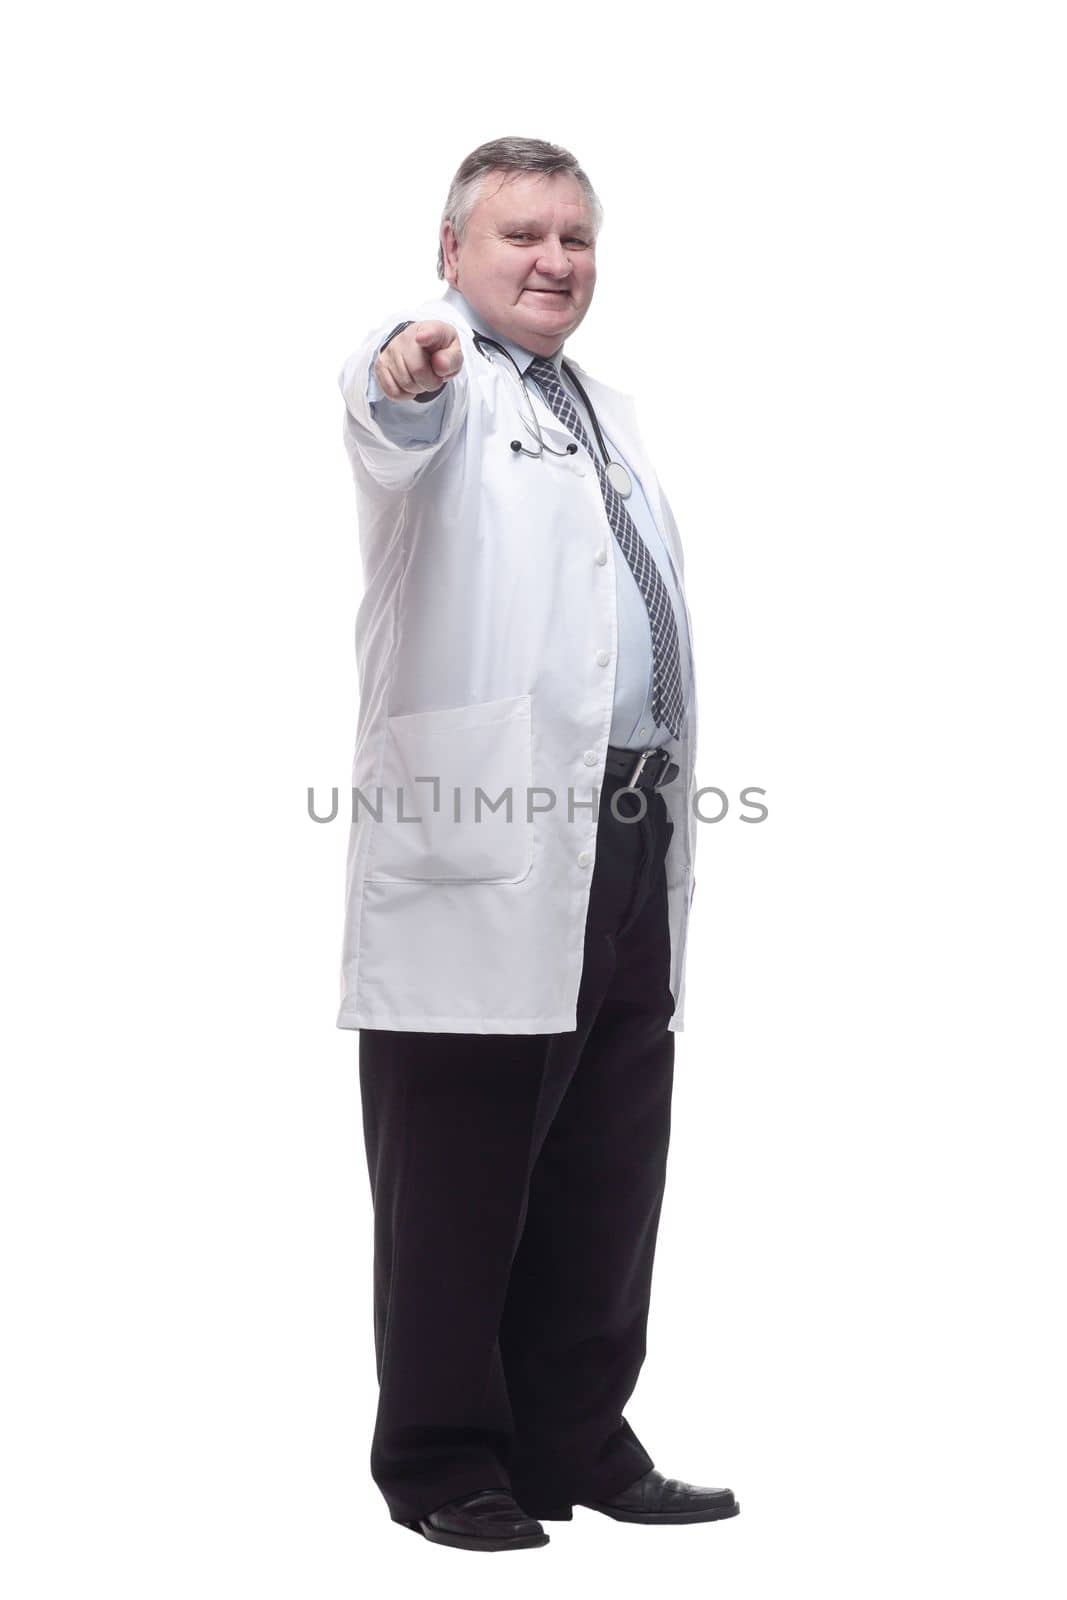 in full growth. competent doctor in a white coat. isolated on a white background.